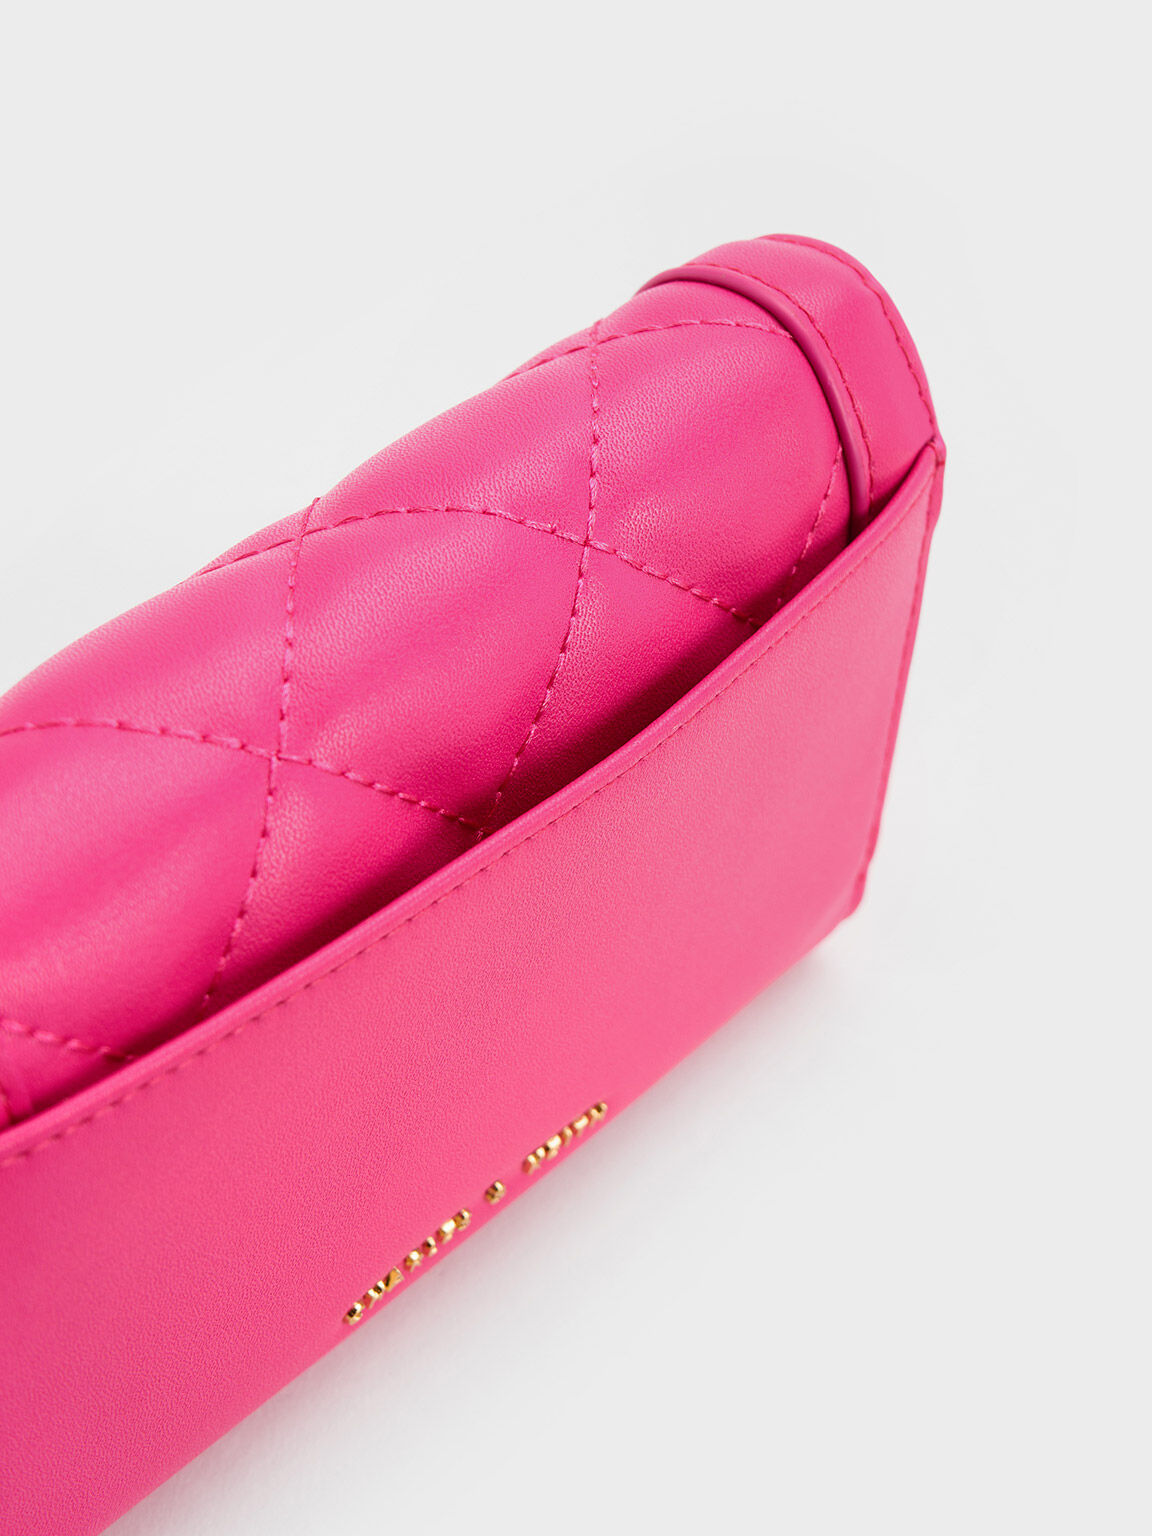 Arley Quilted Wallet, Fuchsia, hi-res